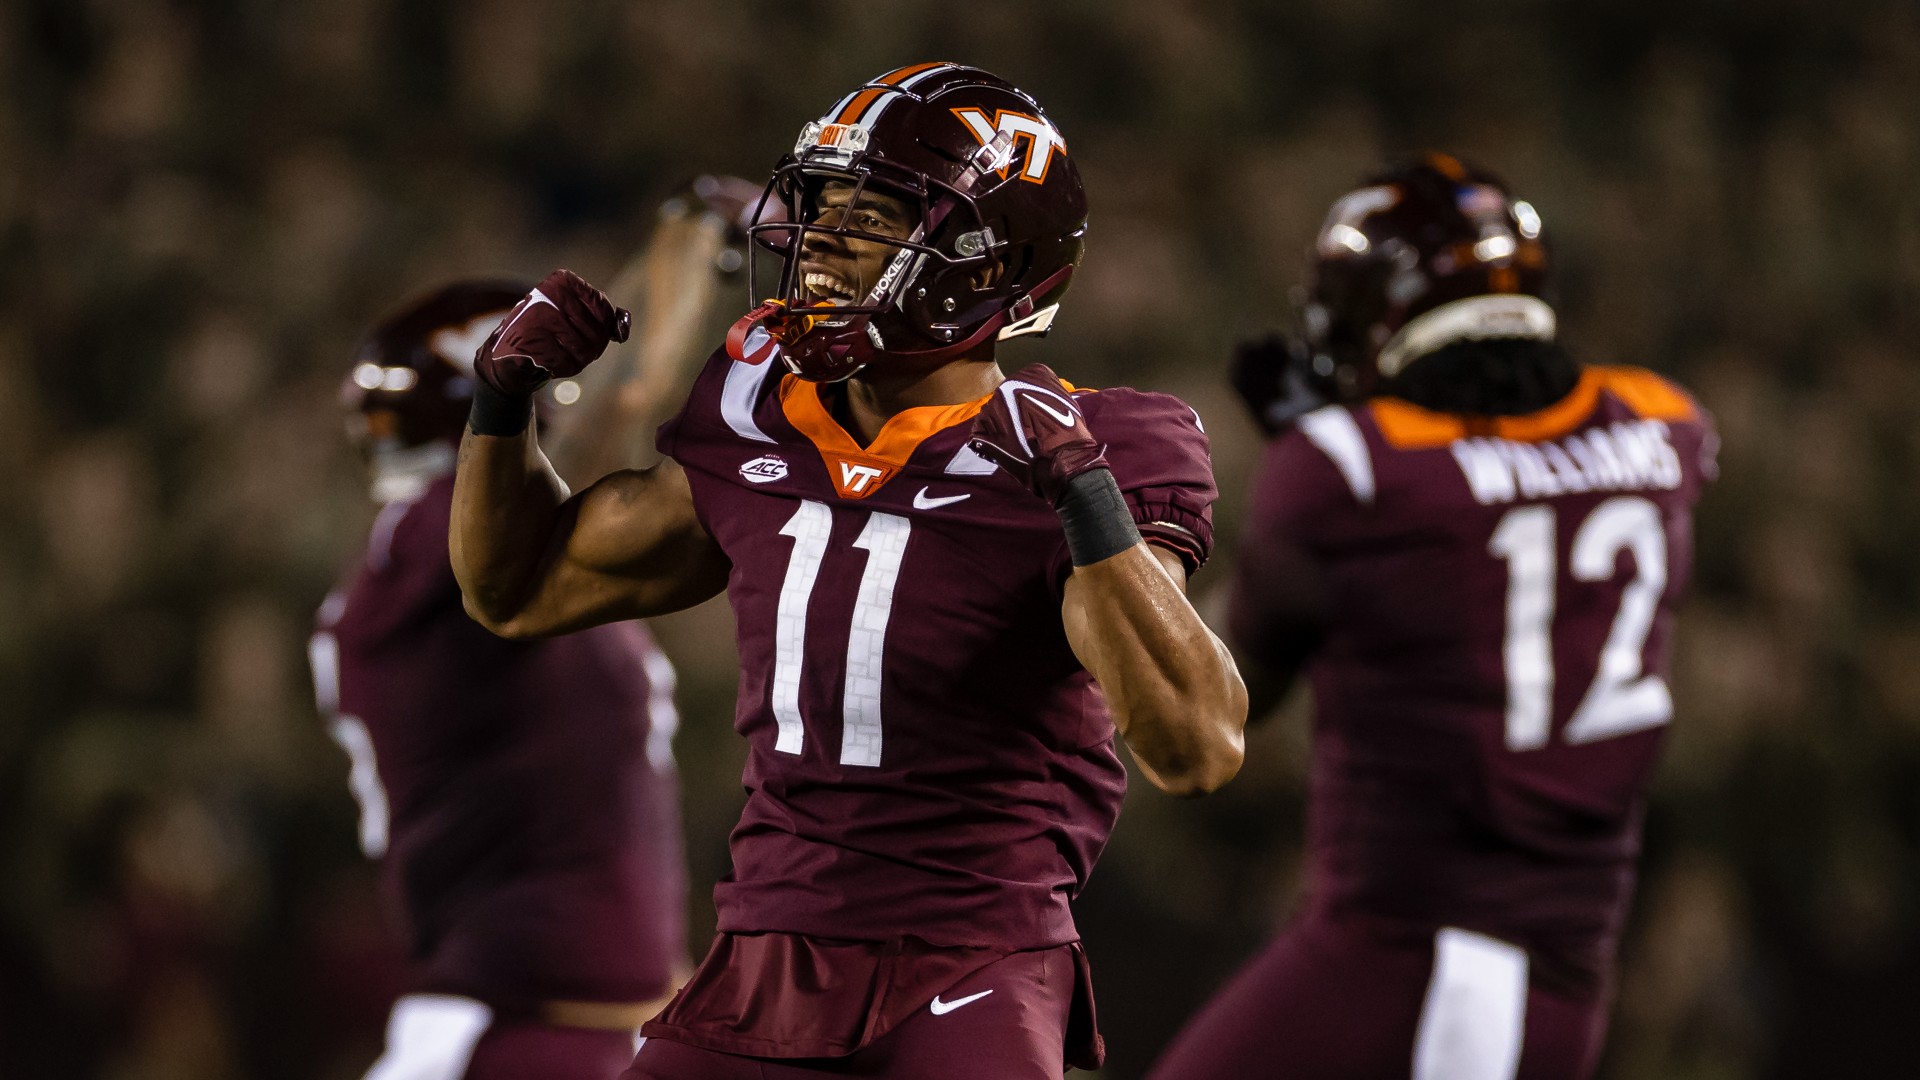 Virginia Tech vs. Miami College Football Odds, Picks, Preview: Will Hurricanes Rebound from Tough Loss? article feature image